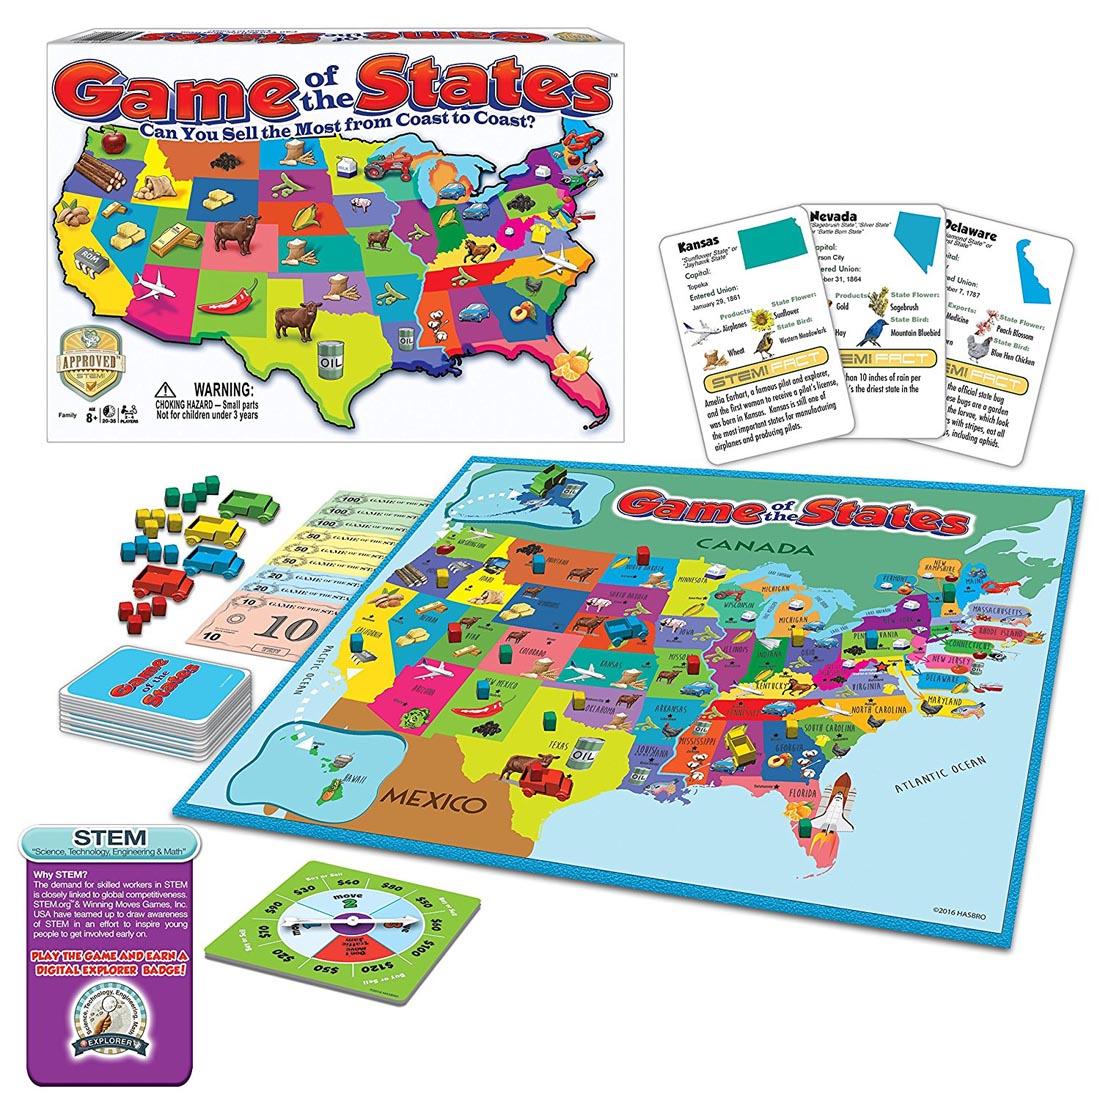 Game of the States, showing box and contents